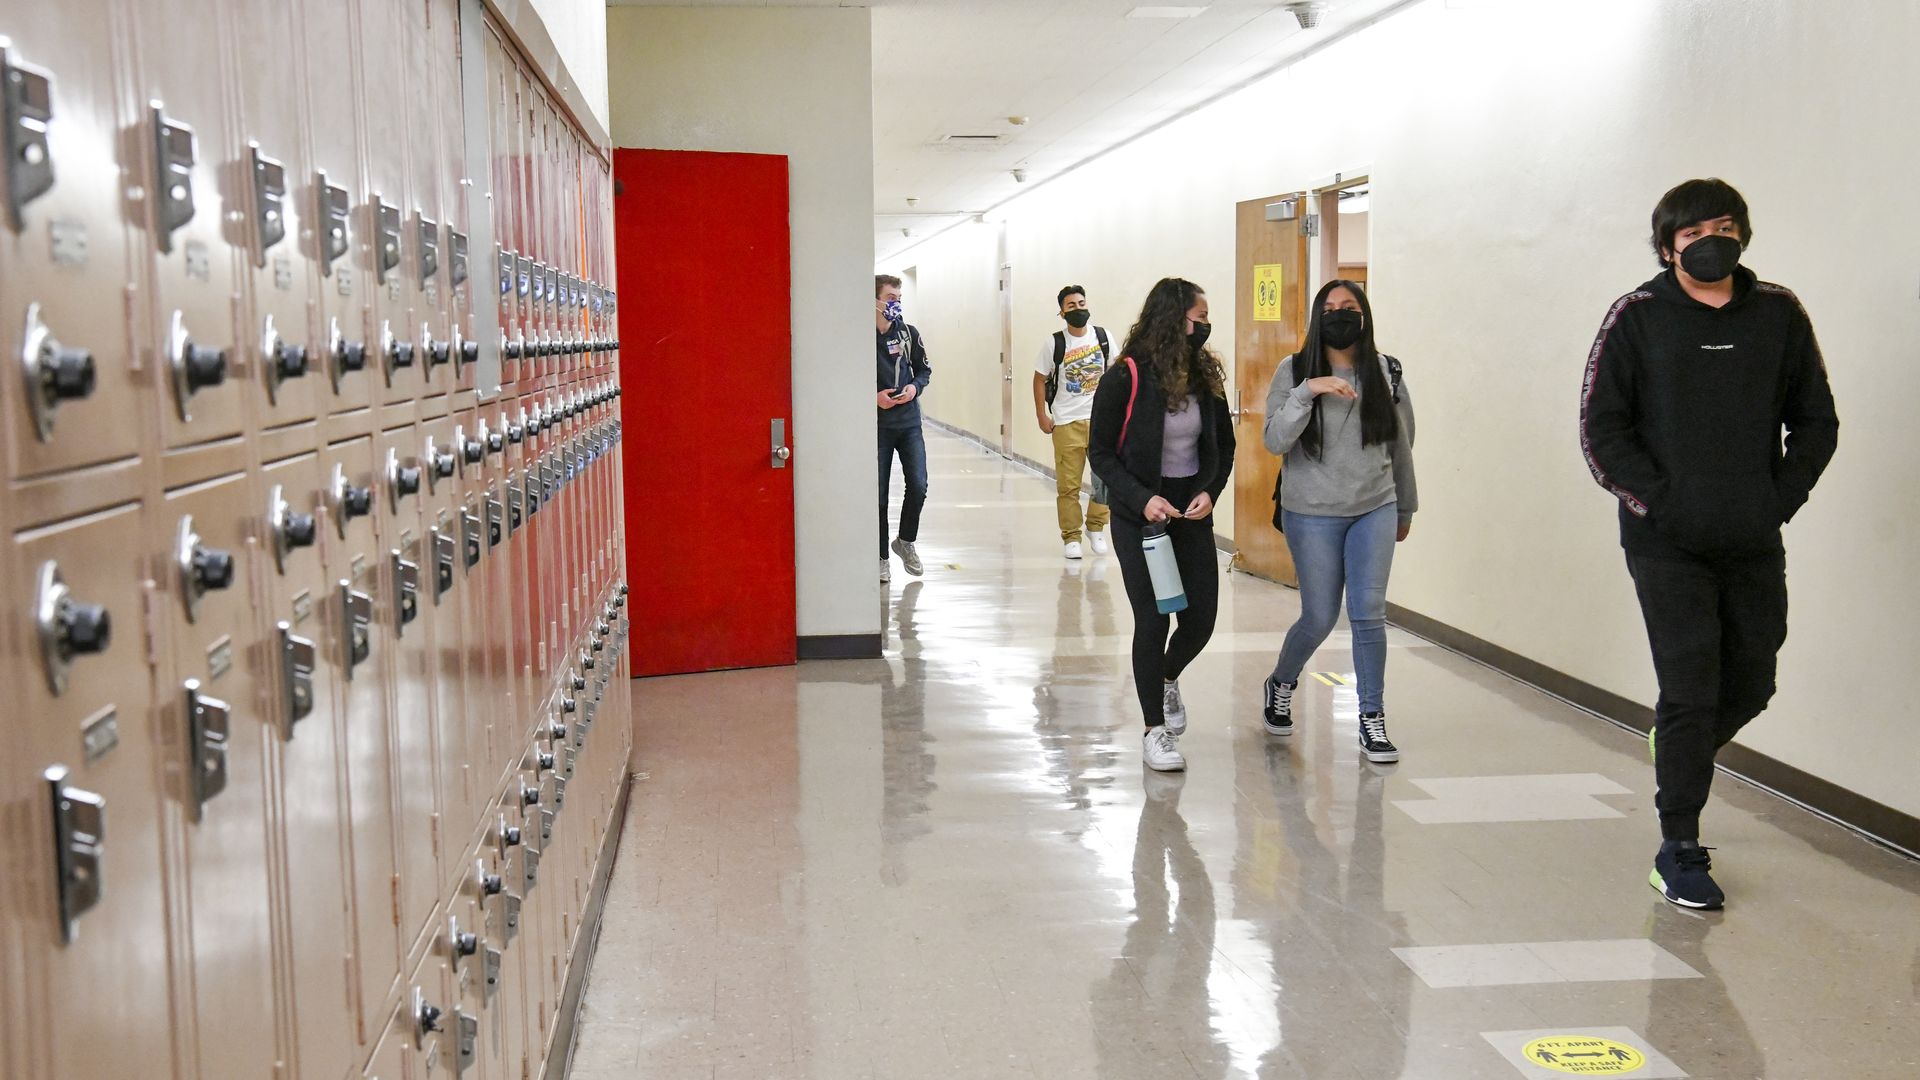 Returning students walk the hallway at Hollywood High School on April 27, 2021 in Los Angeles, California. 